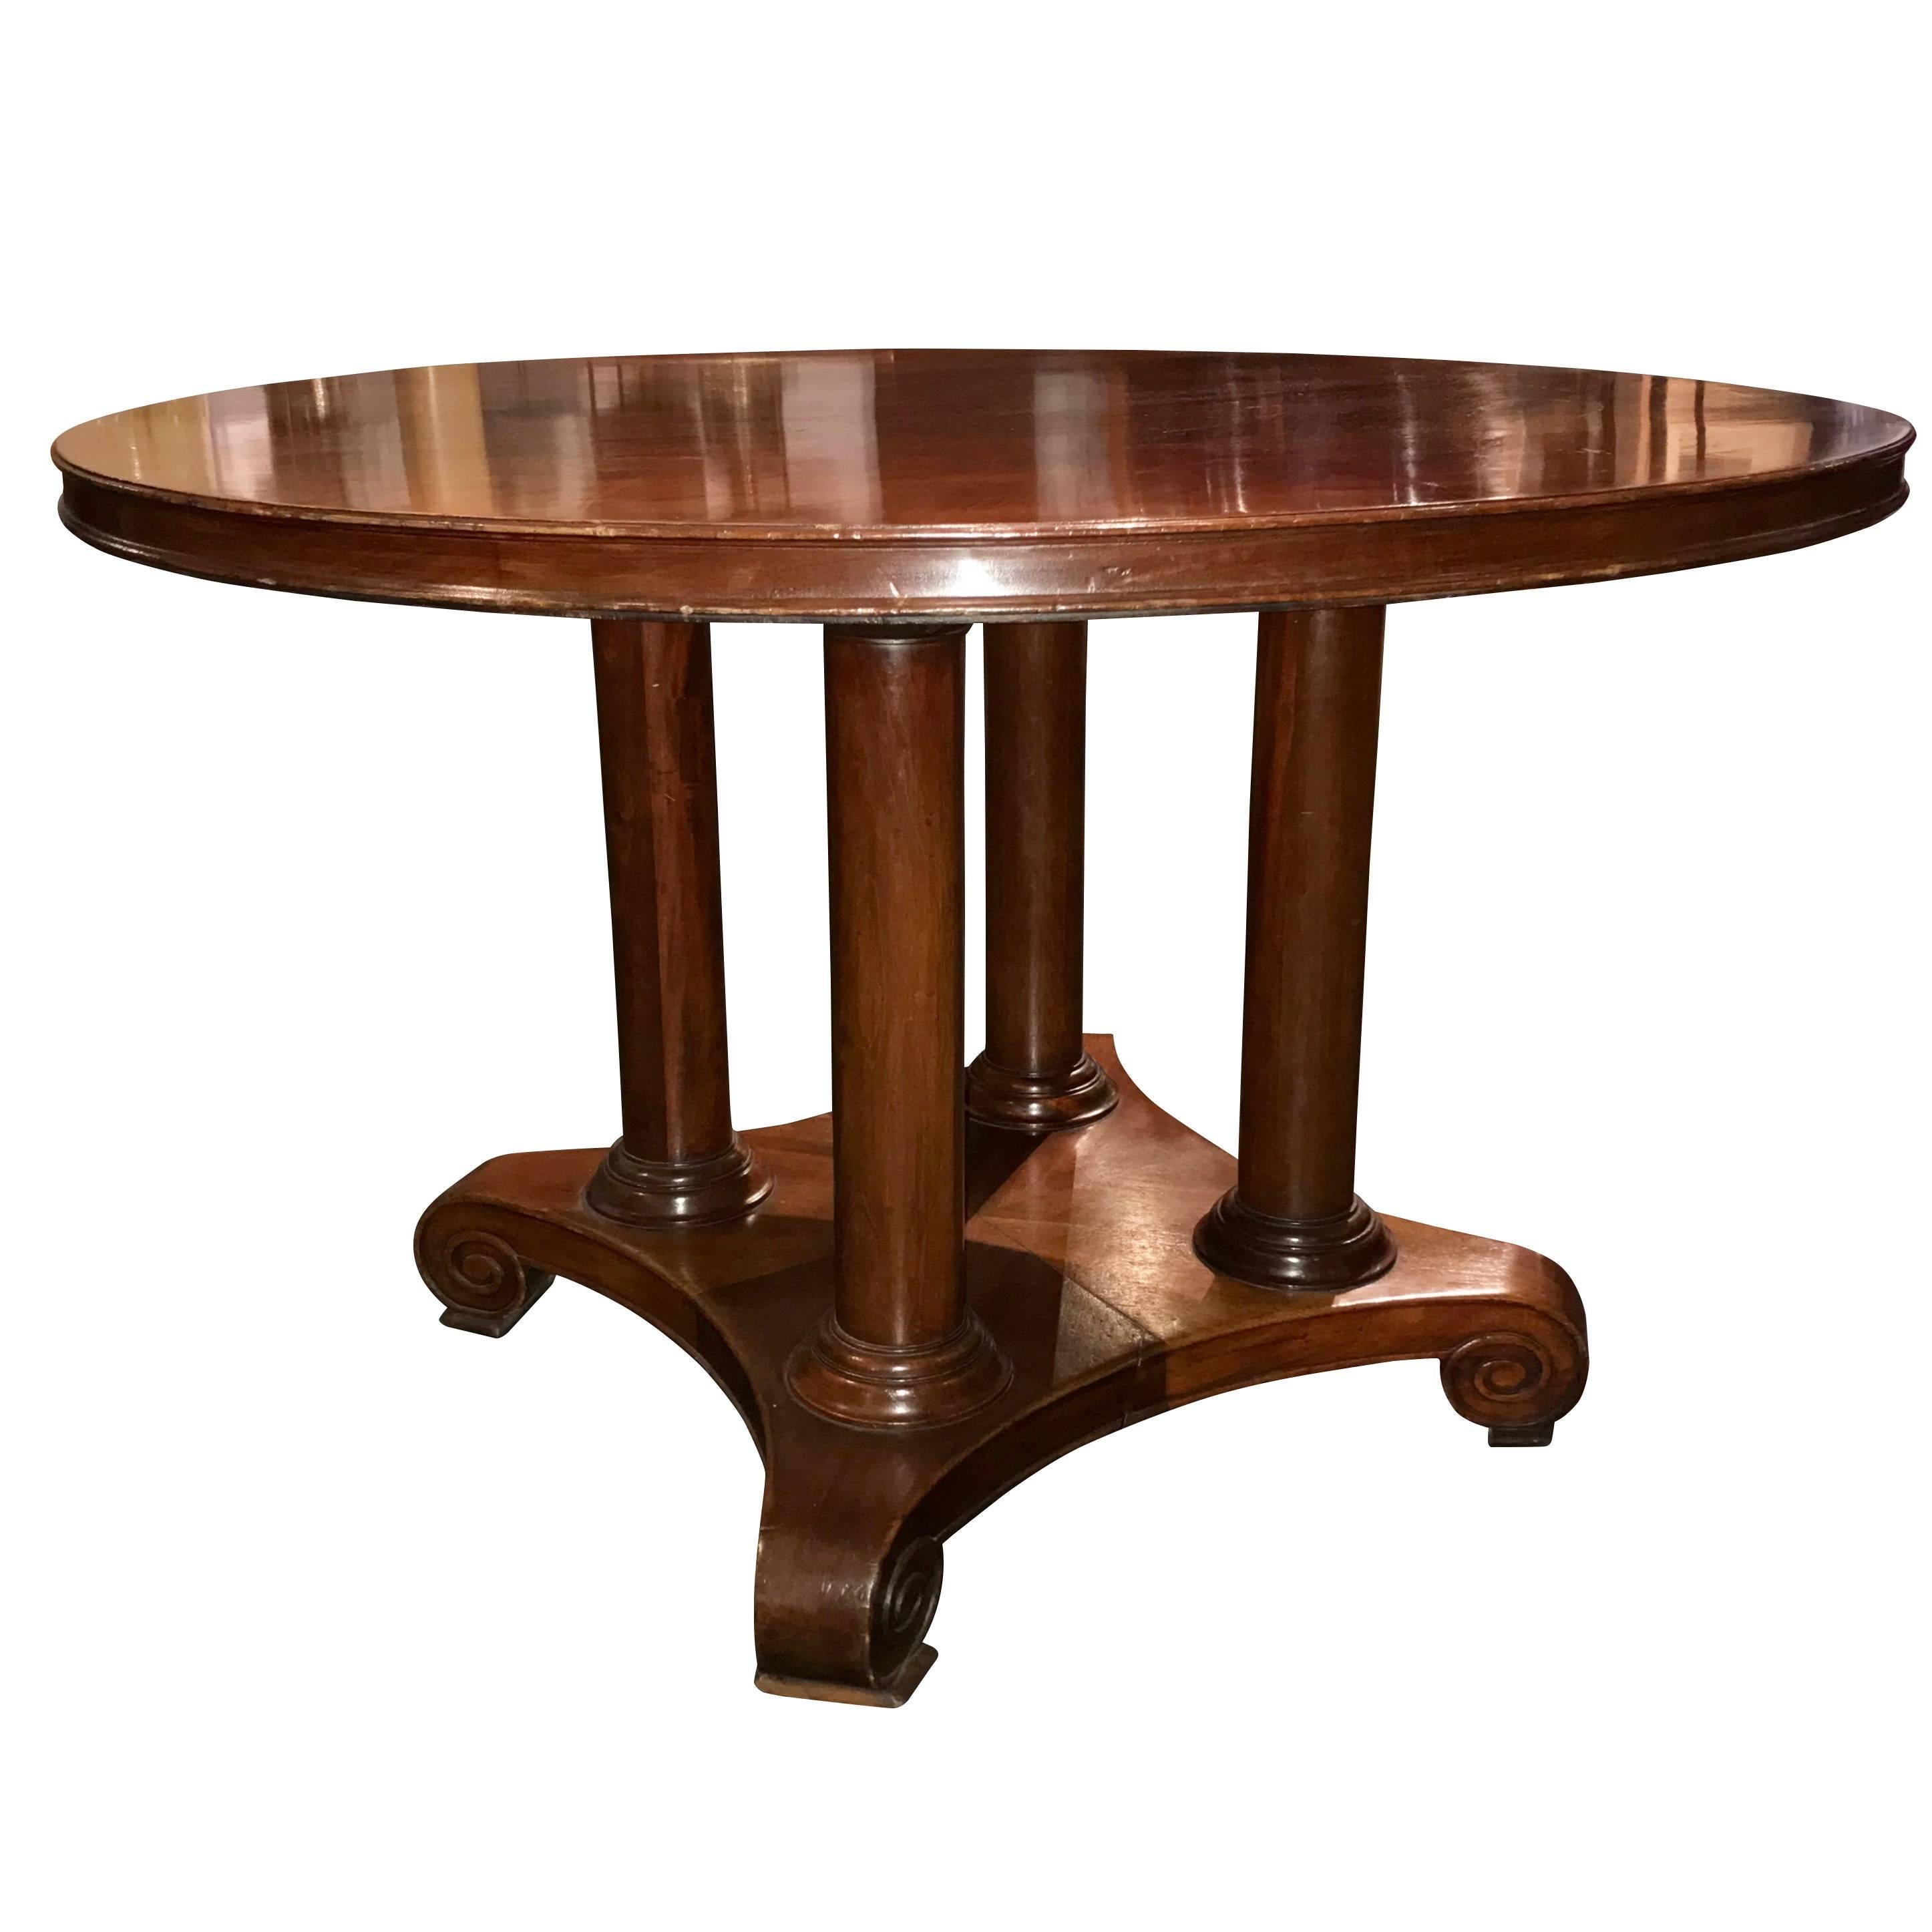 19th Century Round Mahogany Center Hall Or Side Table, France